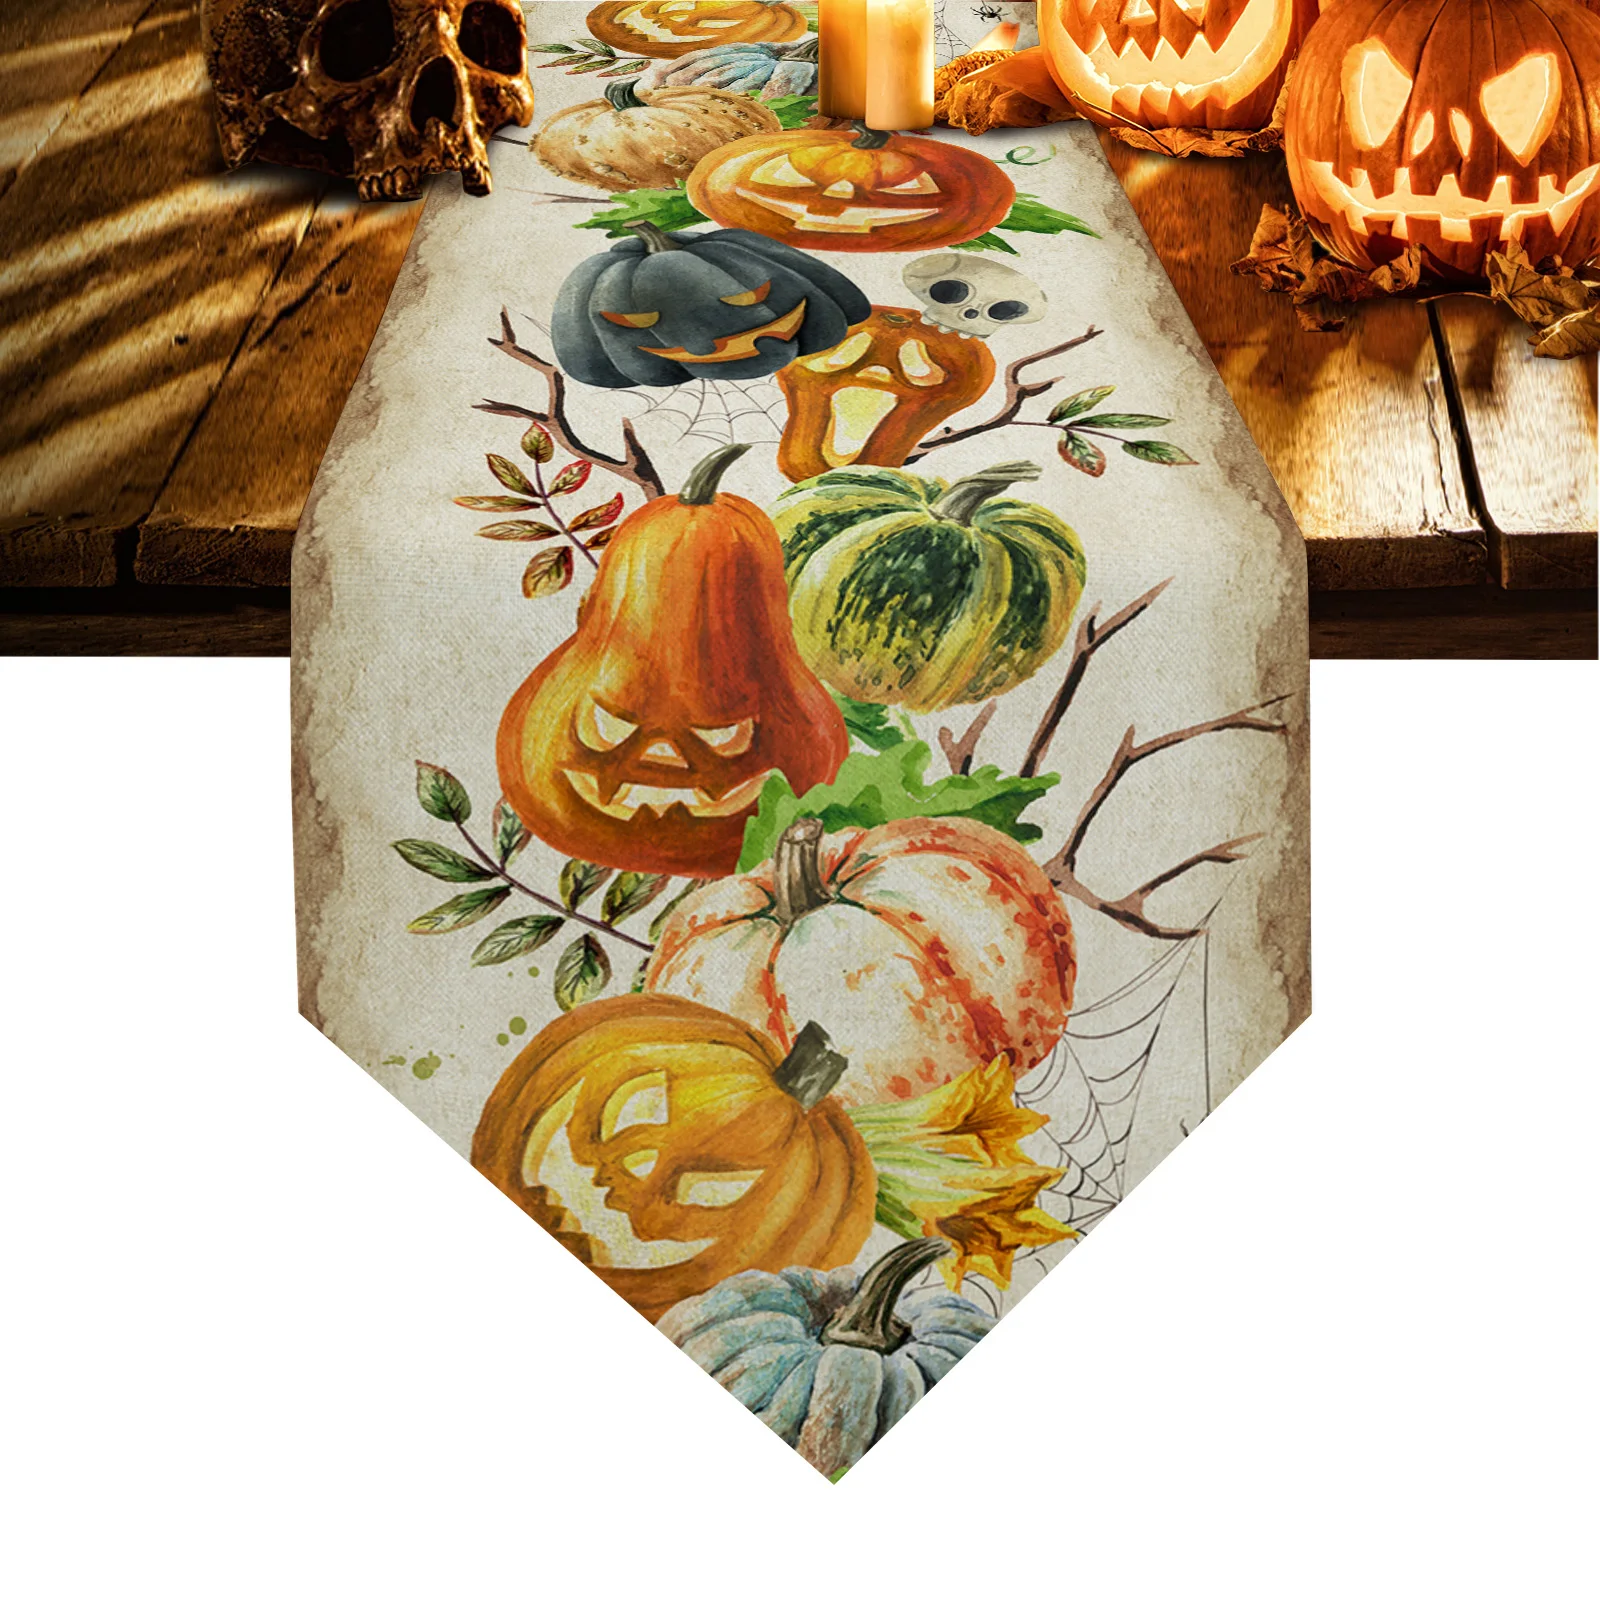 

Halloween Pumpkin Table Runners Festival Party Tablecloths Wedding Decoration Table Cover Cotton Linen Table Runner